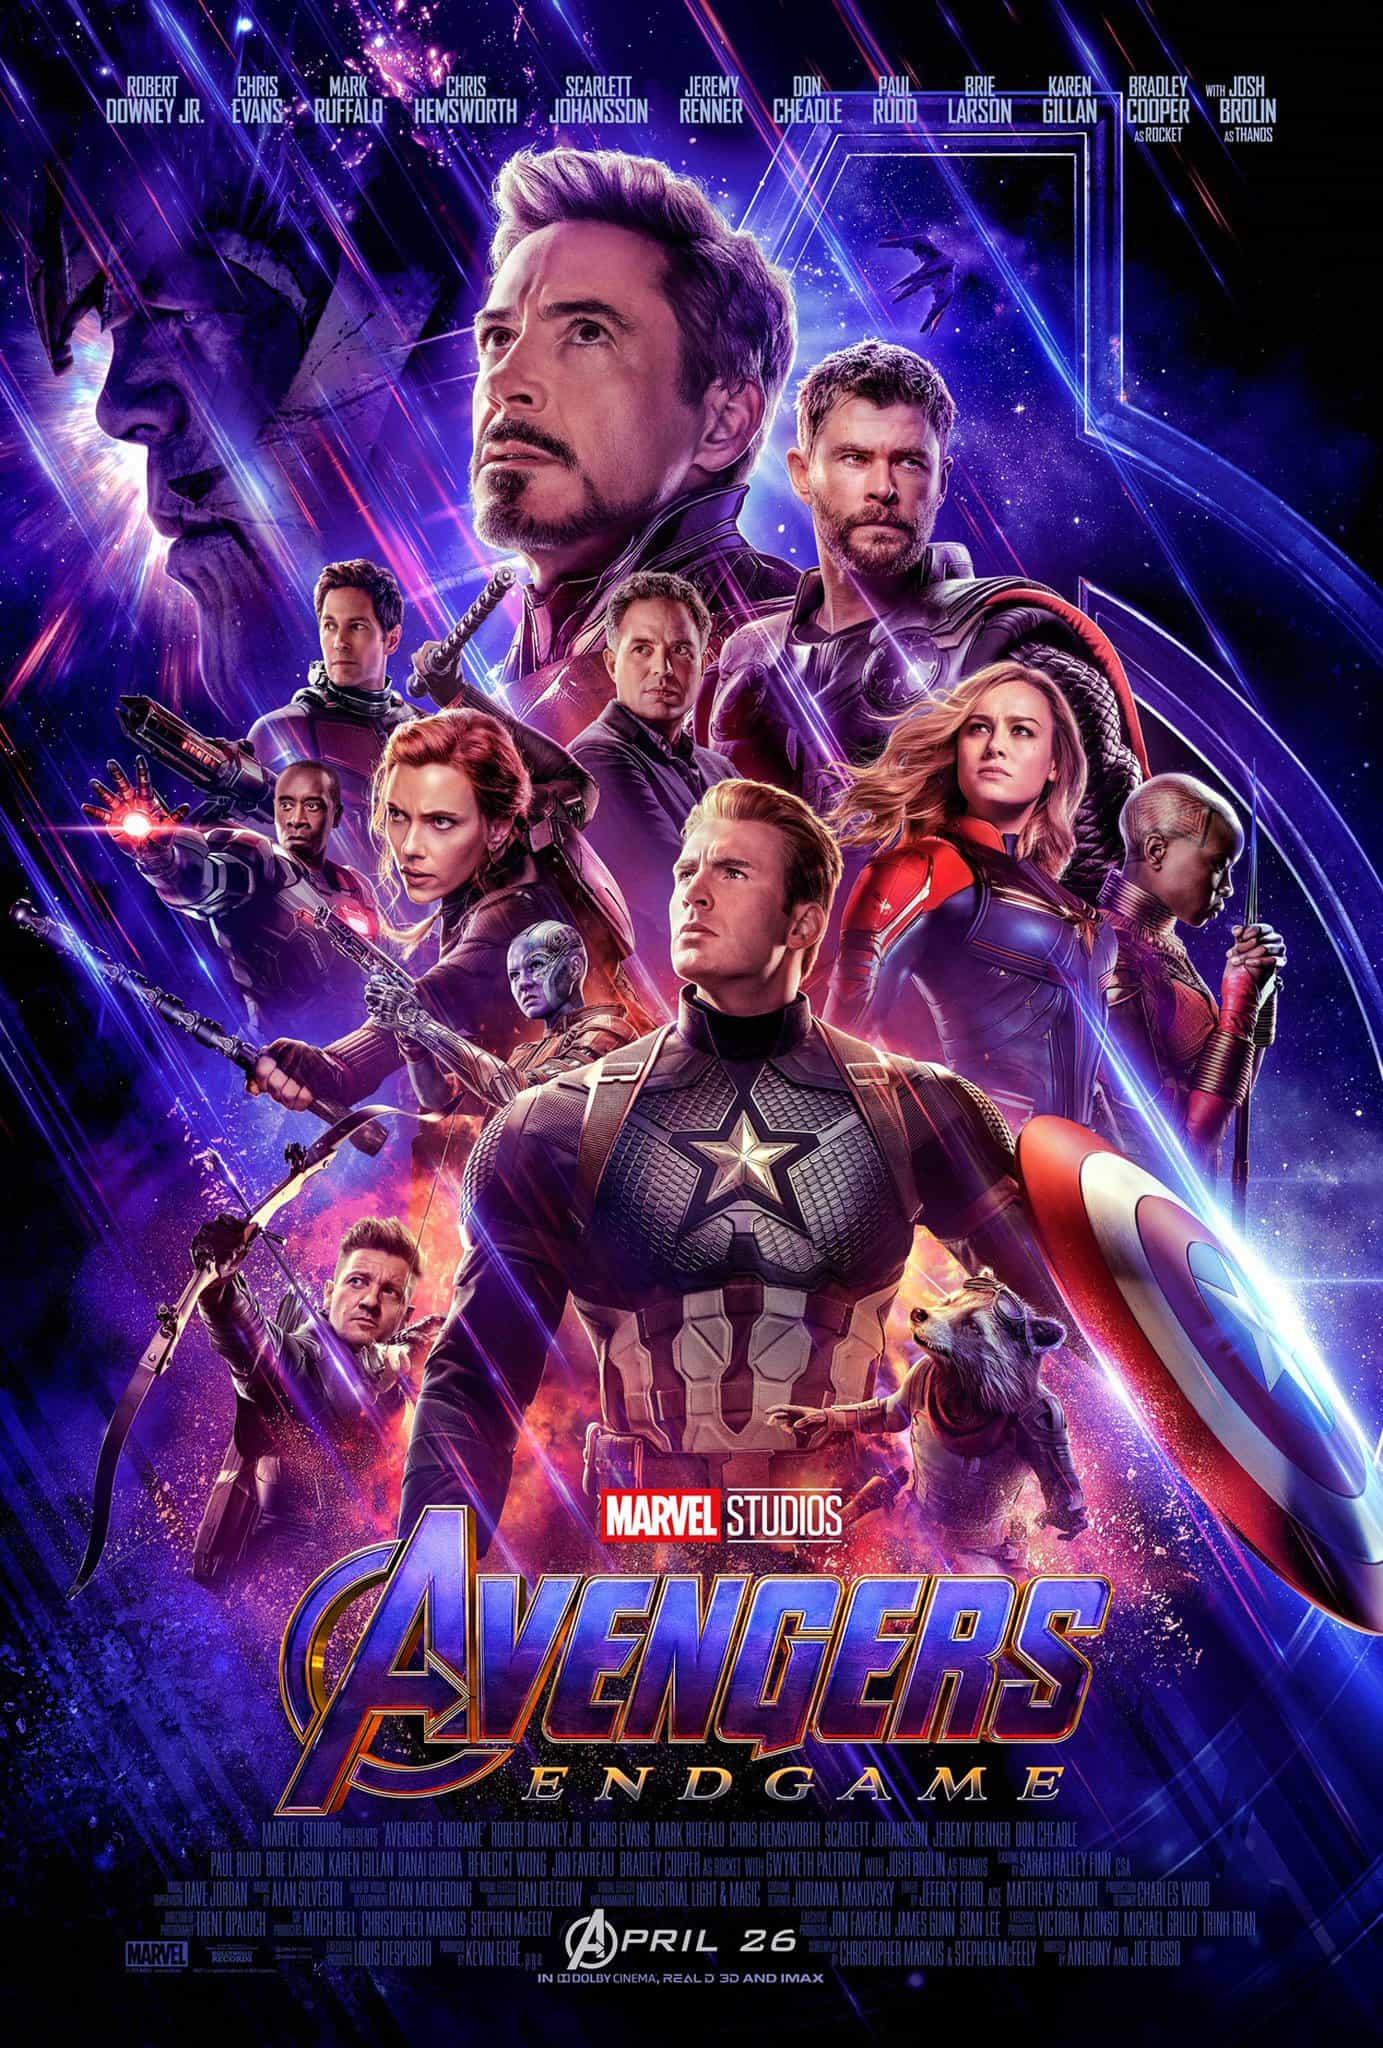 US Box Office Analysis 3 - 5 May 2019:  Avengers Engame stays on top with $145 million second weekend, The Intruder enters at number 2